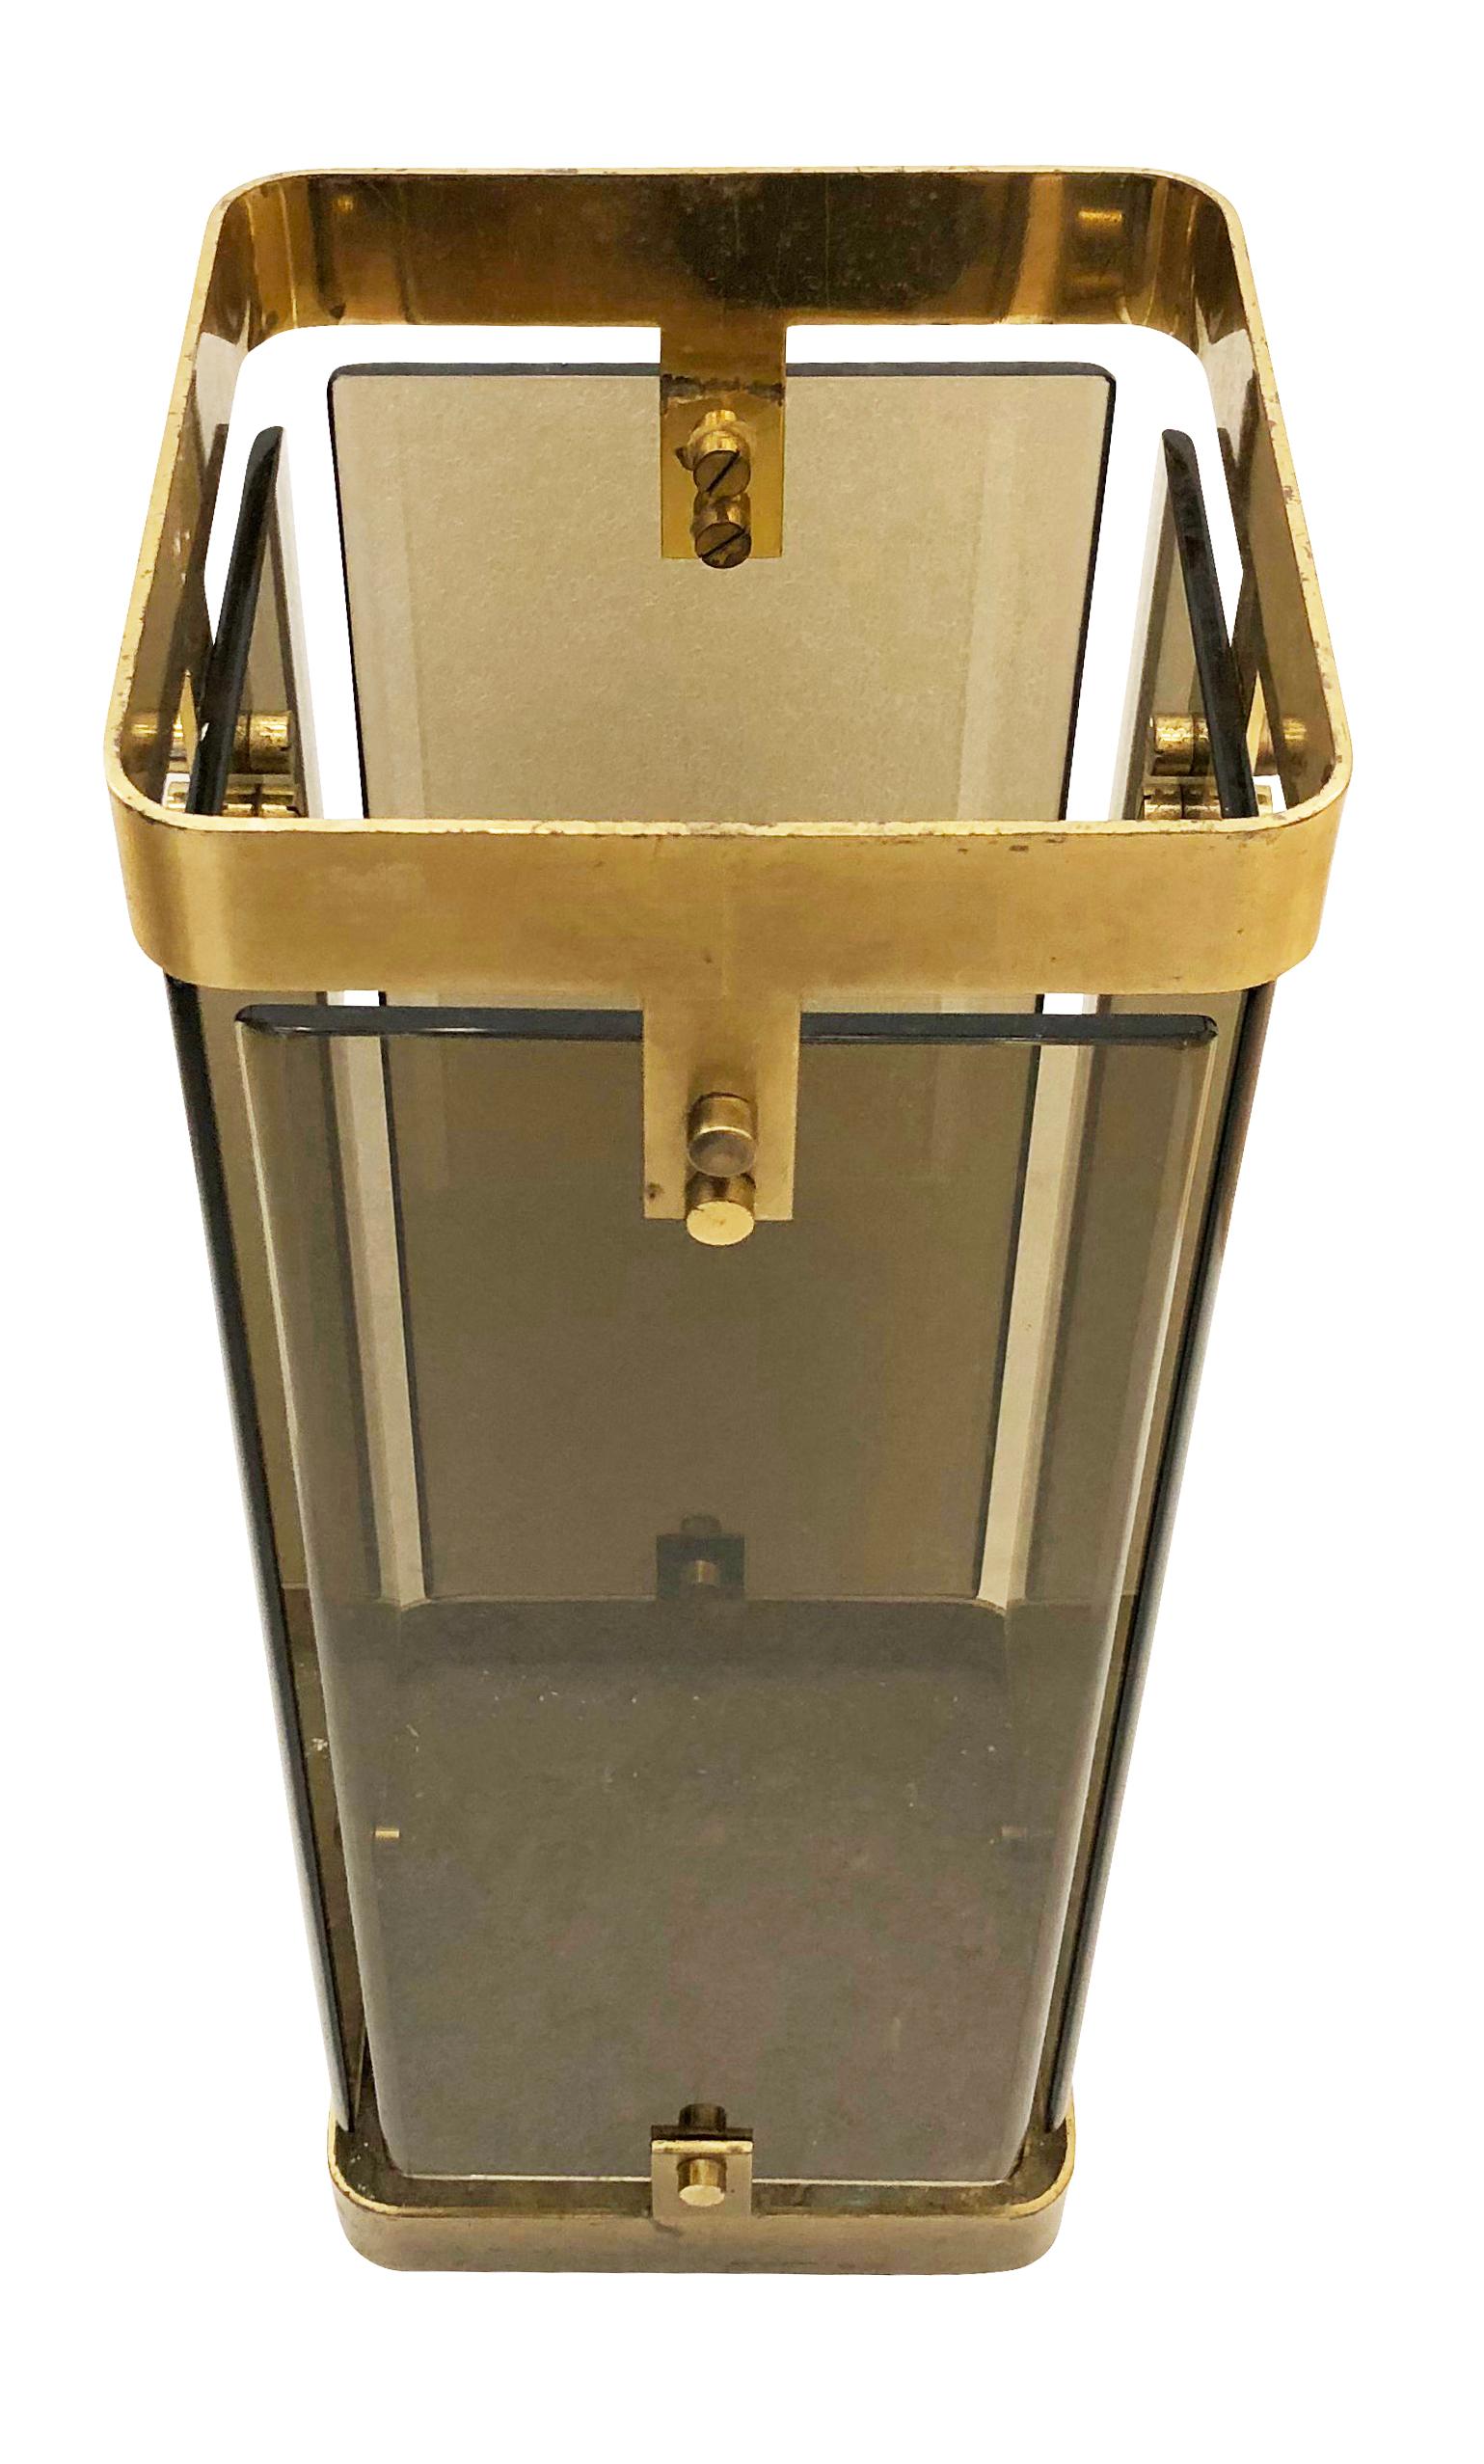 Fontana Arte umbrella stand with brass framing and four rectangular smoked glasses.

Condition: Good vintage condition, minor wear consistent with age and use. Brass can be polished upon request.

Measures: Width 9”

Depth 9”

Height